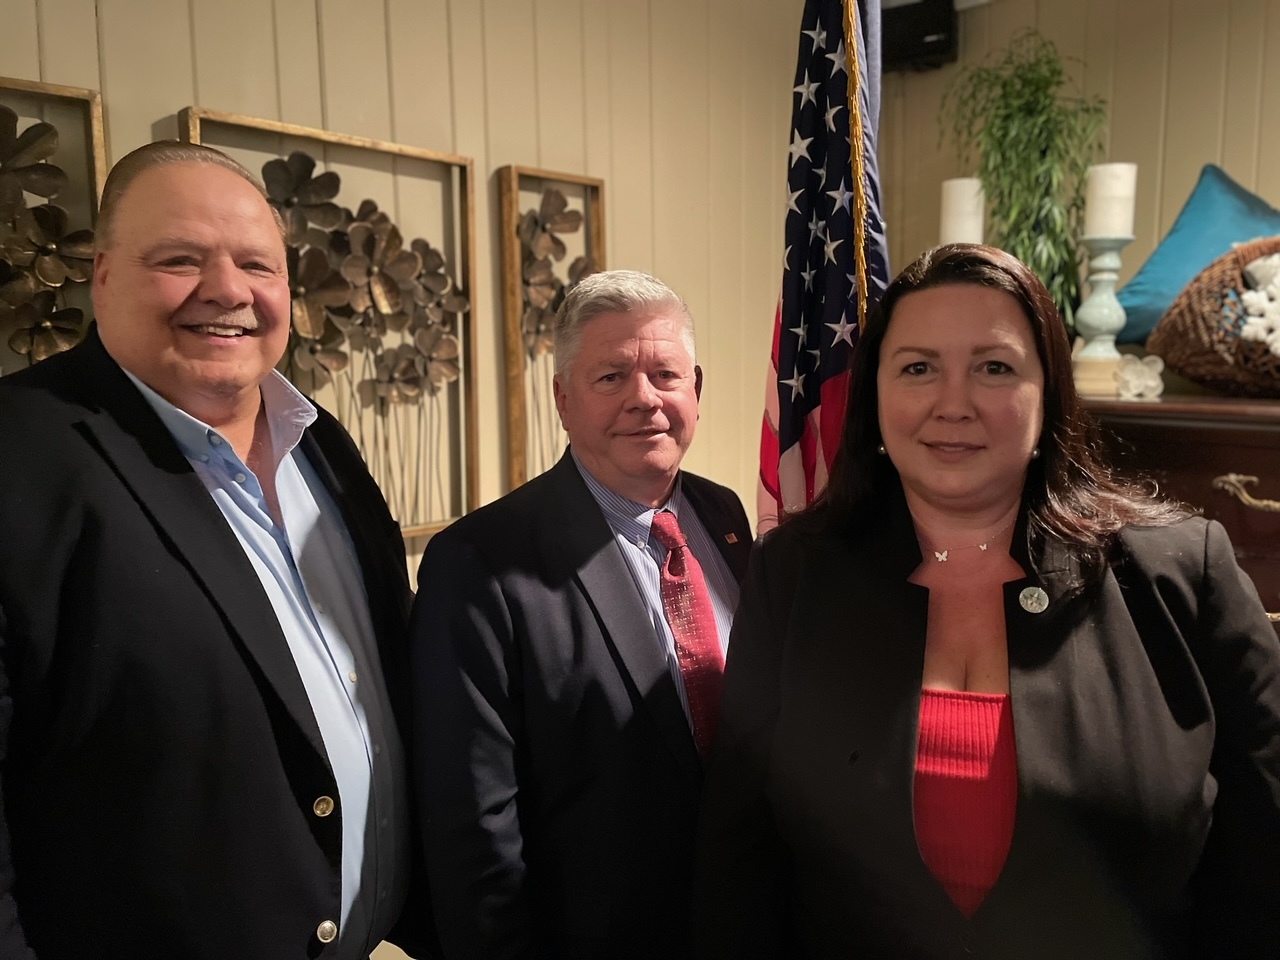 Southampton Town Supervisor candidate Cyndi McNamara with running mate, Councilman Rick Martel, and GOP Party chair David Betts at the nominating convention.  COURTESY SOUTHAMPTON REPUBLICANS